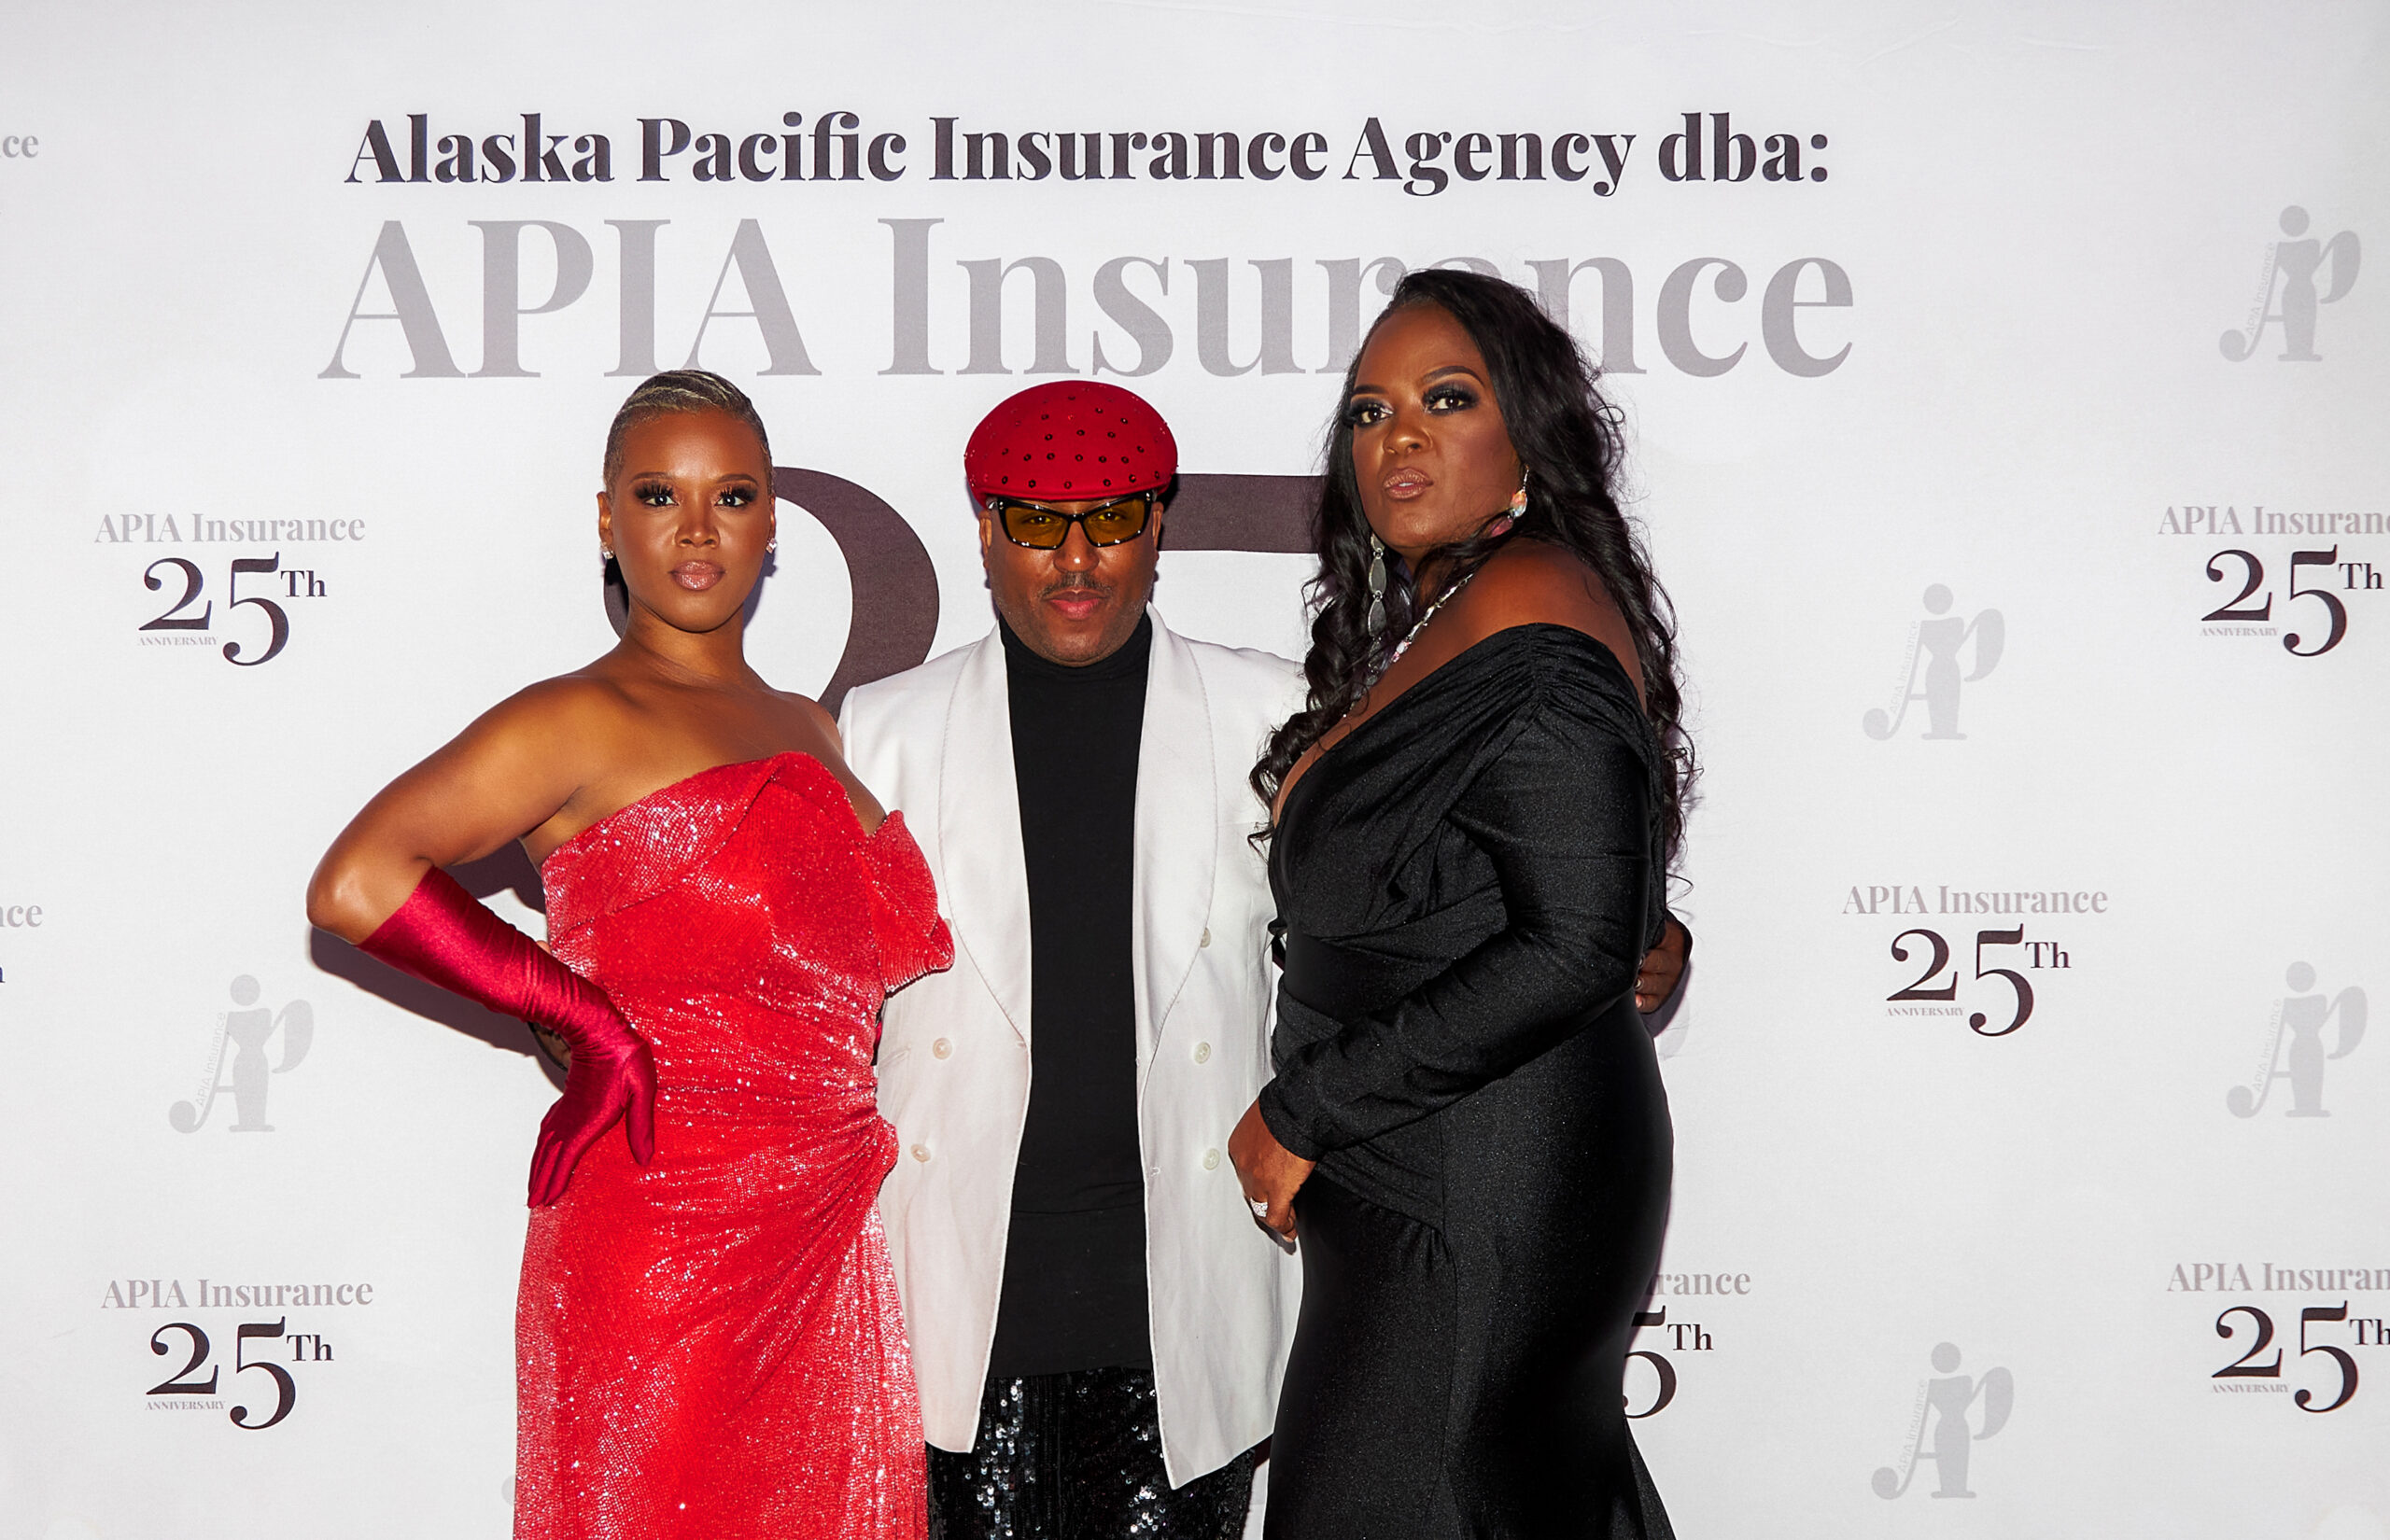 Claire’s Life: Celebrating Alaska Pacific Insurance Agency’s 25th Anniversary with Tracey Parrish, Dr. Courtney Hammonds, Yvette Crocker, and More!